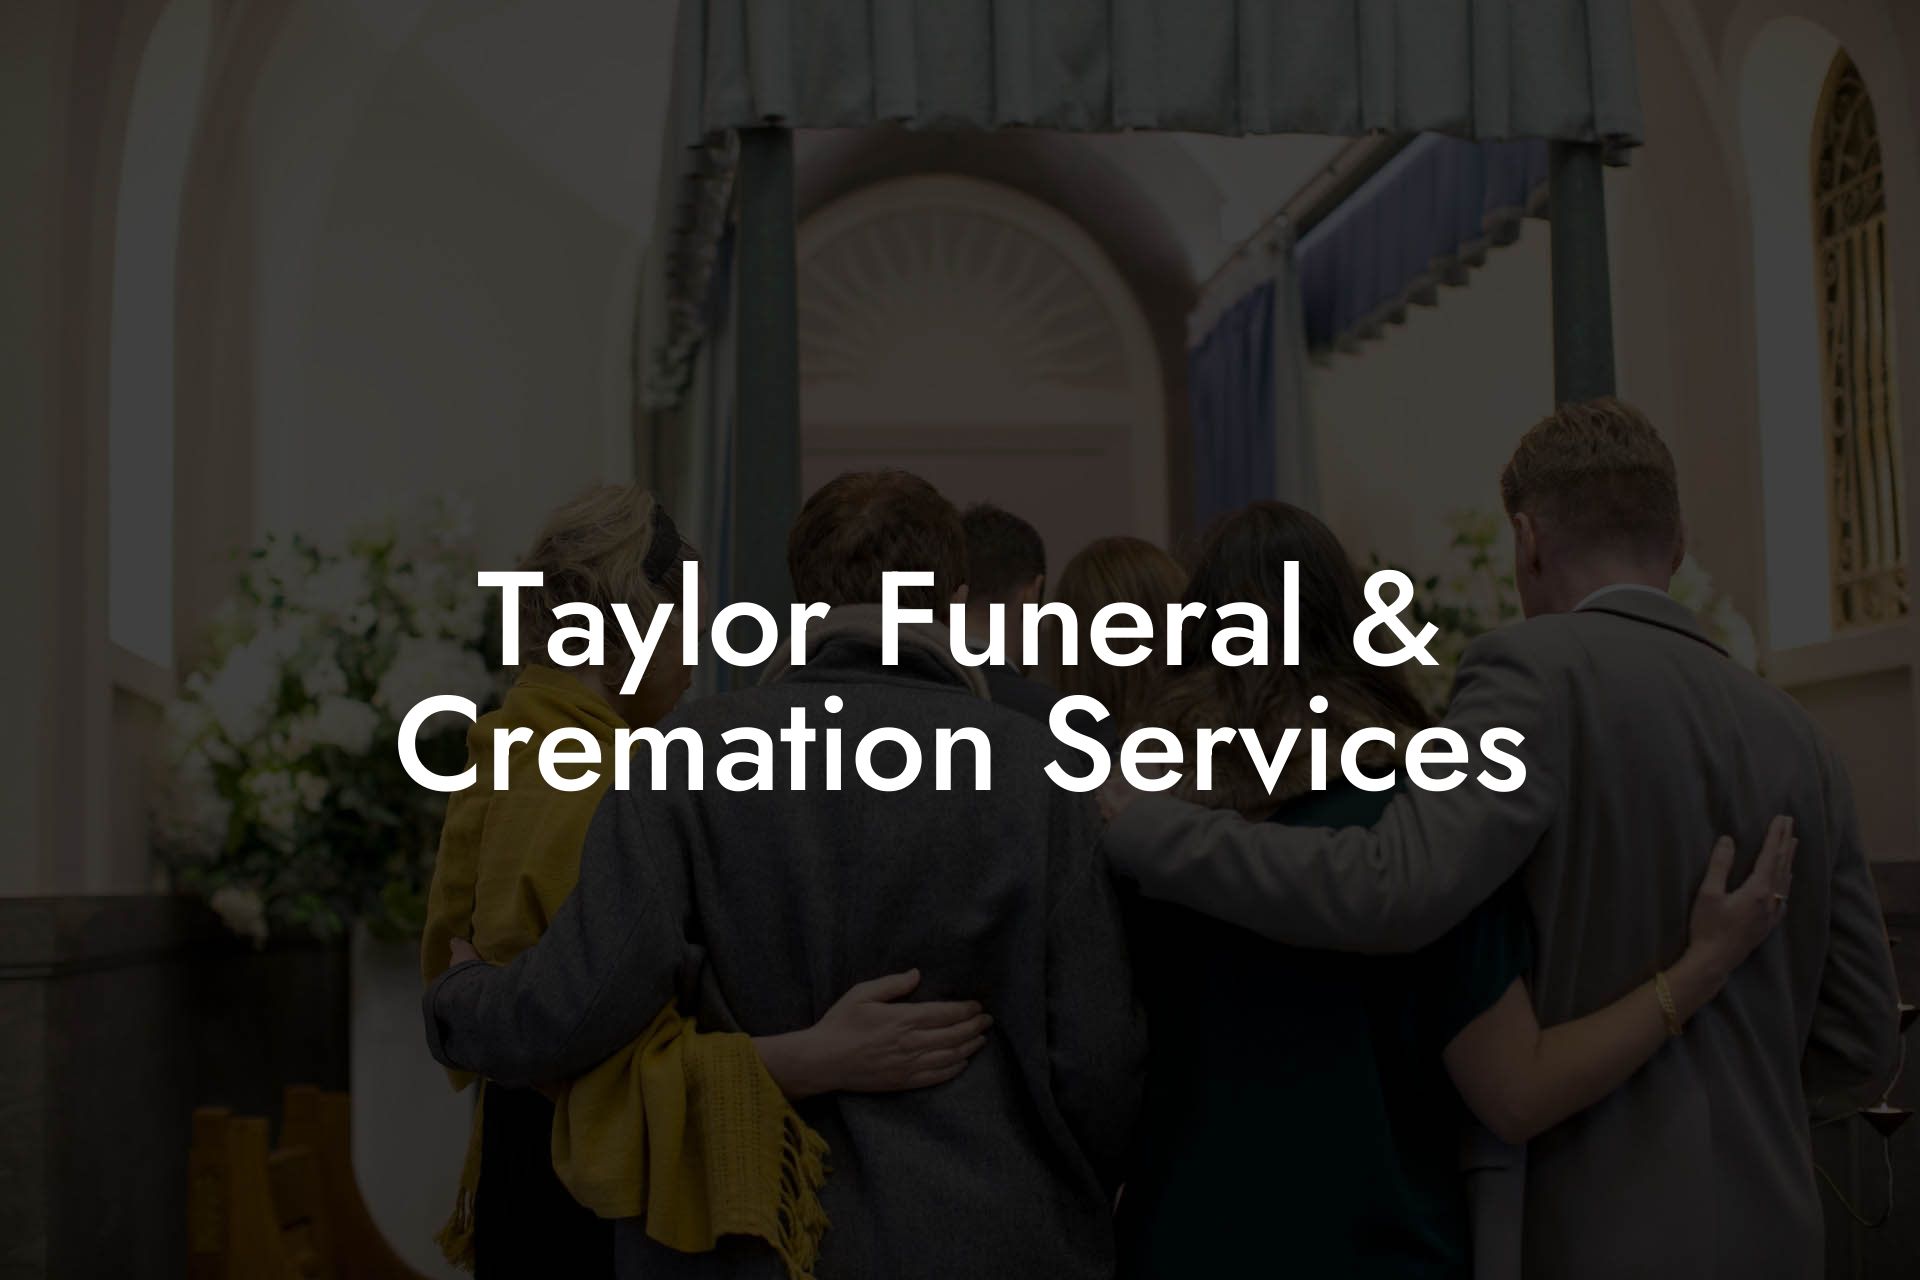 Taylor Funeral & Cremation Services